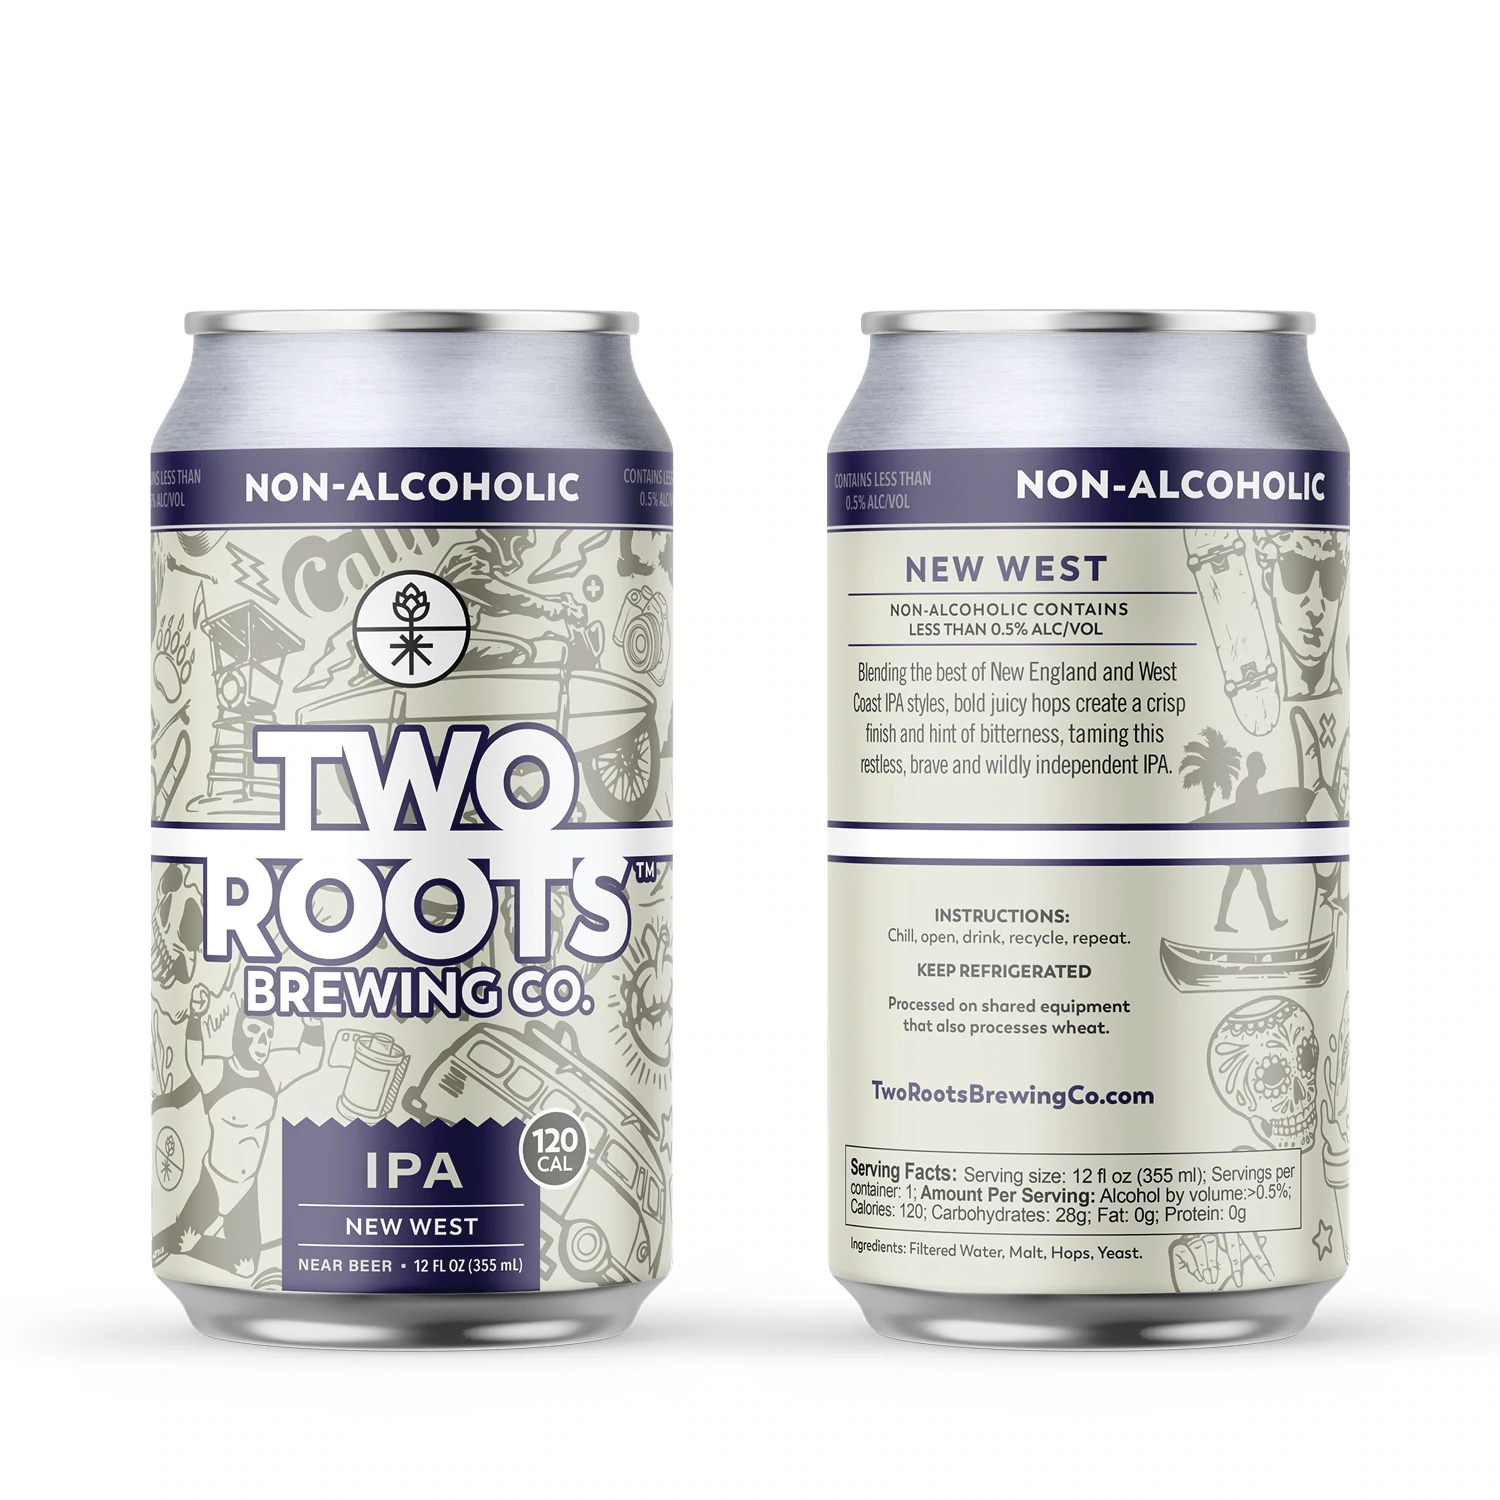 New West Non Alcoholic IPA by Two Roots Brewing